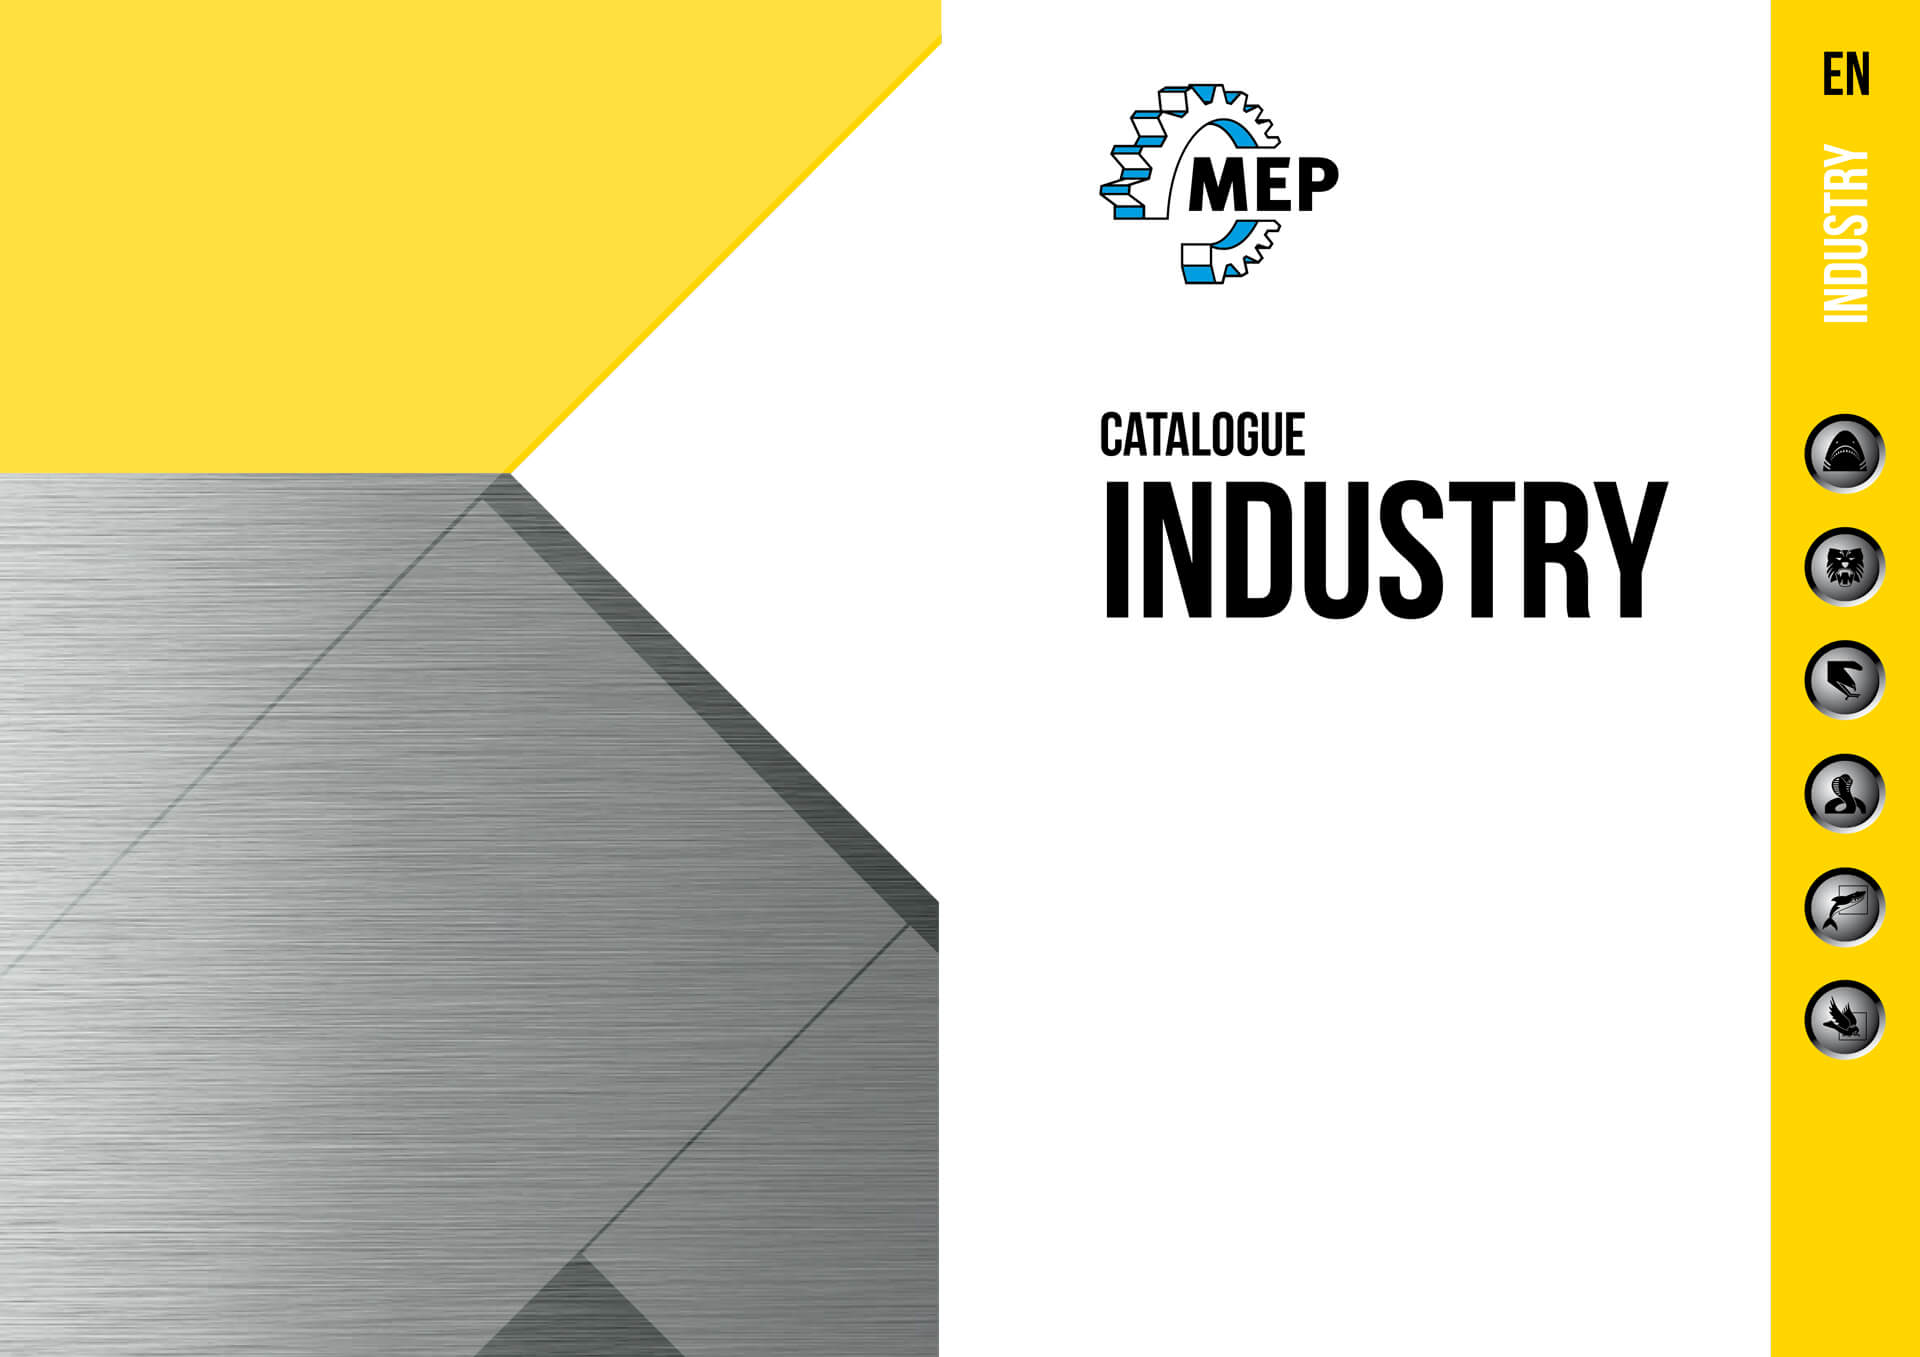 Catalogues INDUSTRY of Mep Sawing machines for metals | © MEP S.p.A. - Circular and band sawing machines to cut metals